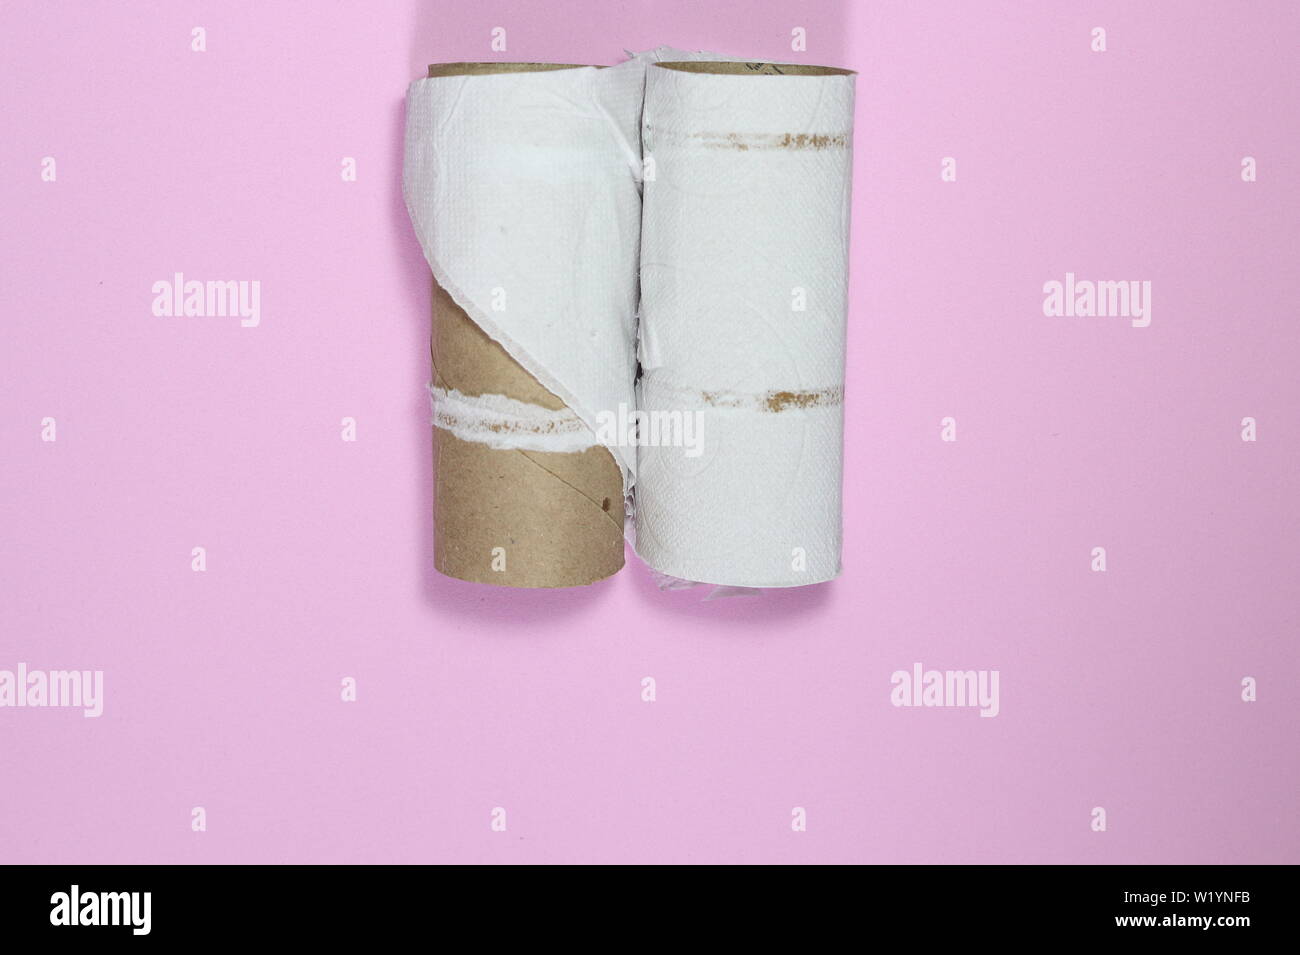 Toilet paper roll ran out. It's a metaphor about couples, business, half feelings and emptiness Stock Photo